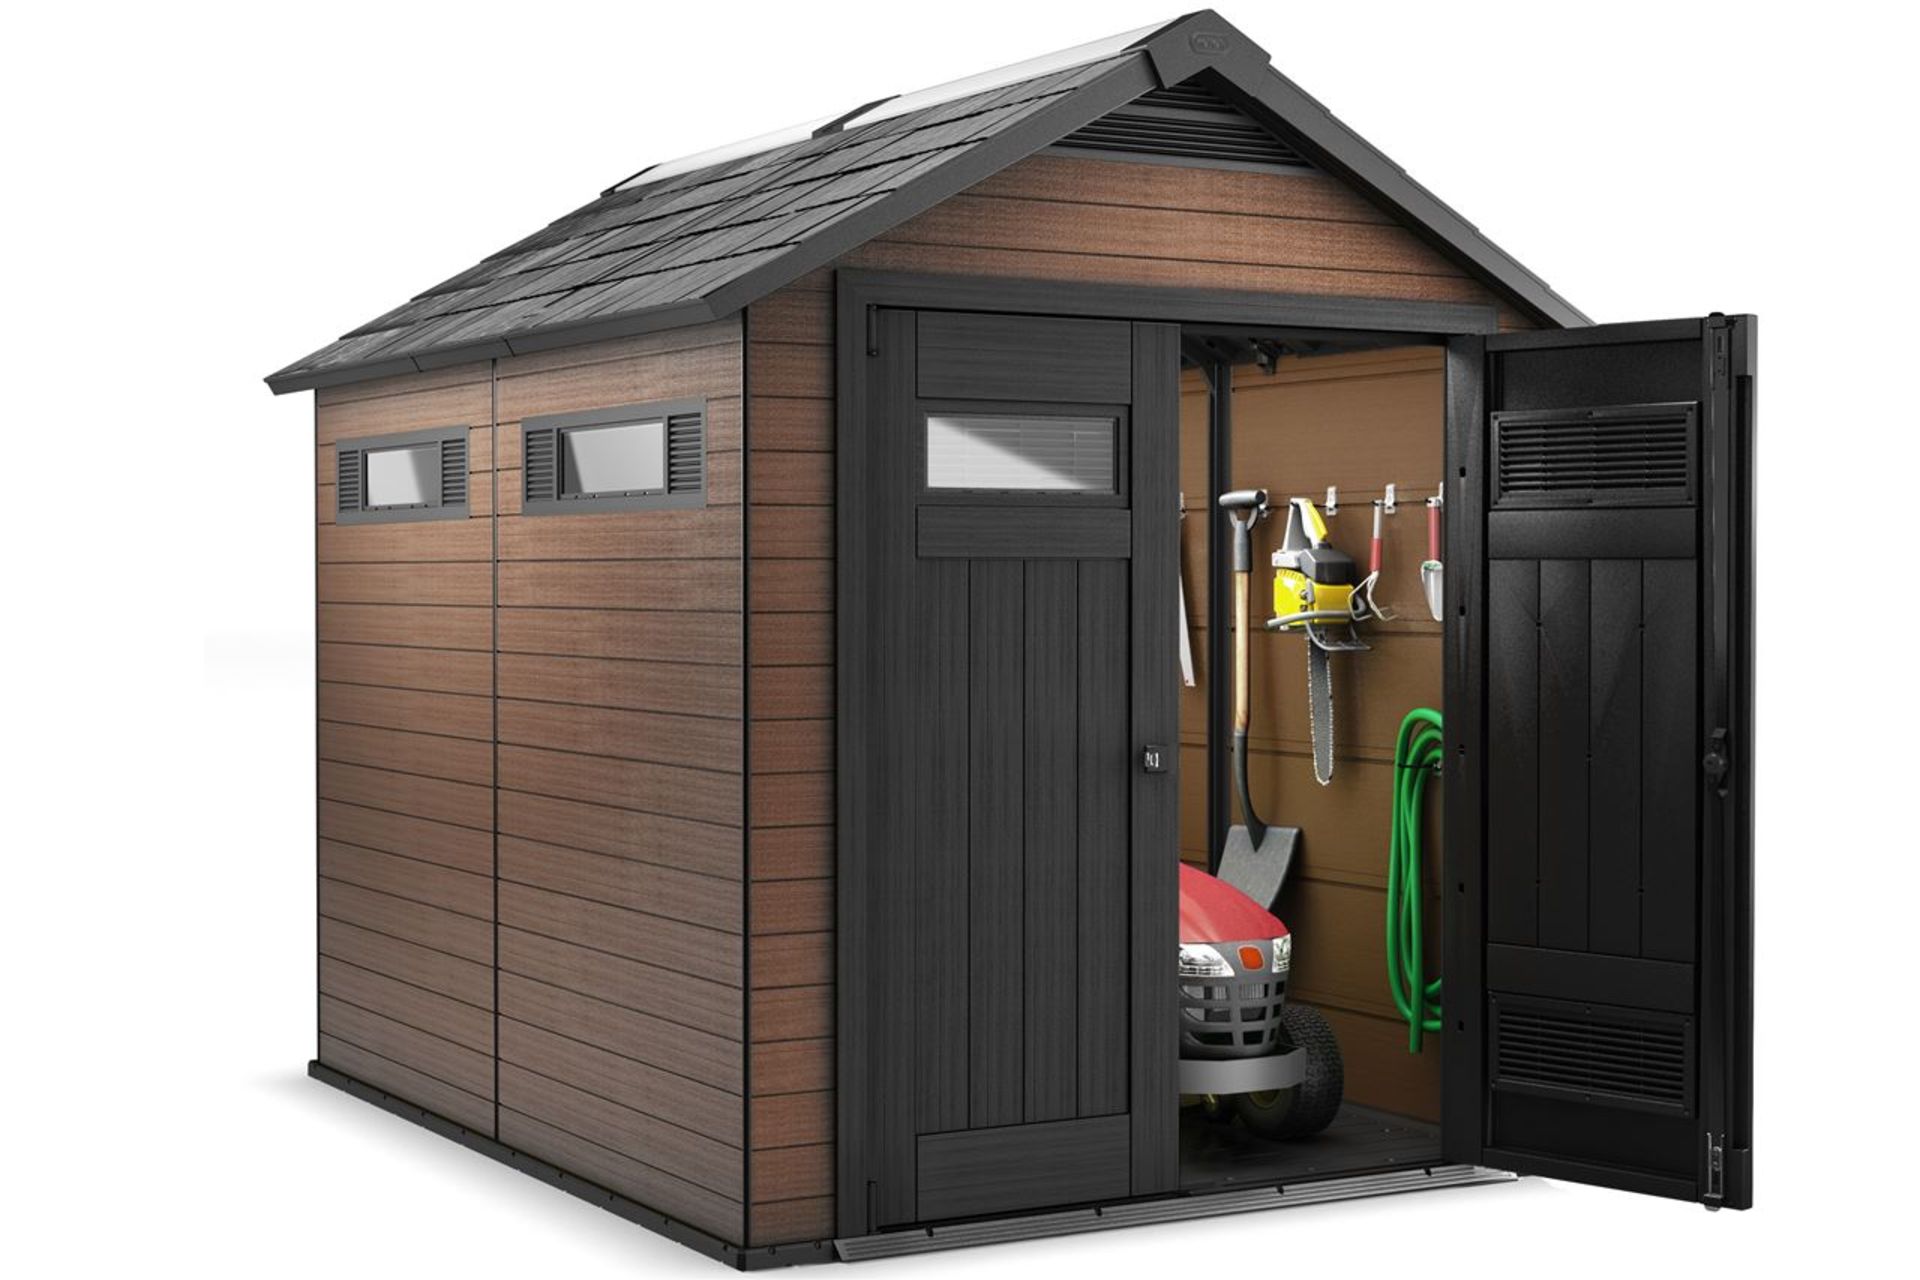 Keter Fusion 759 Shed RRP £1300 - Image 3 of 5